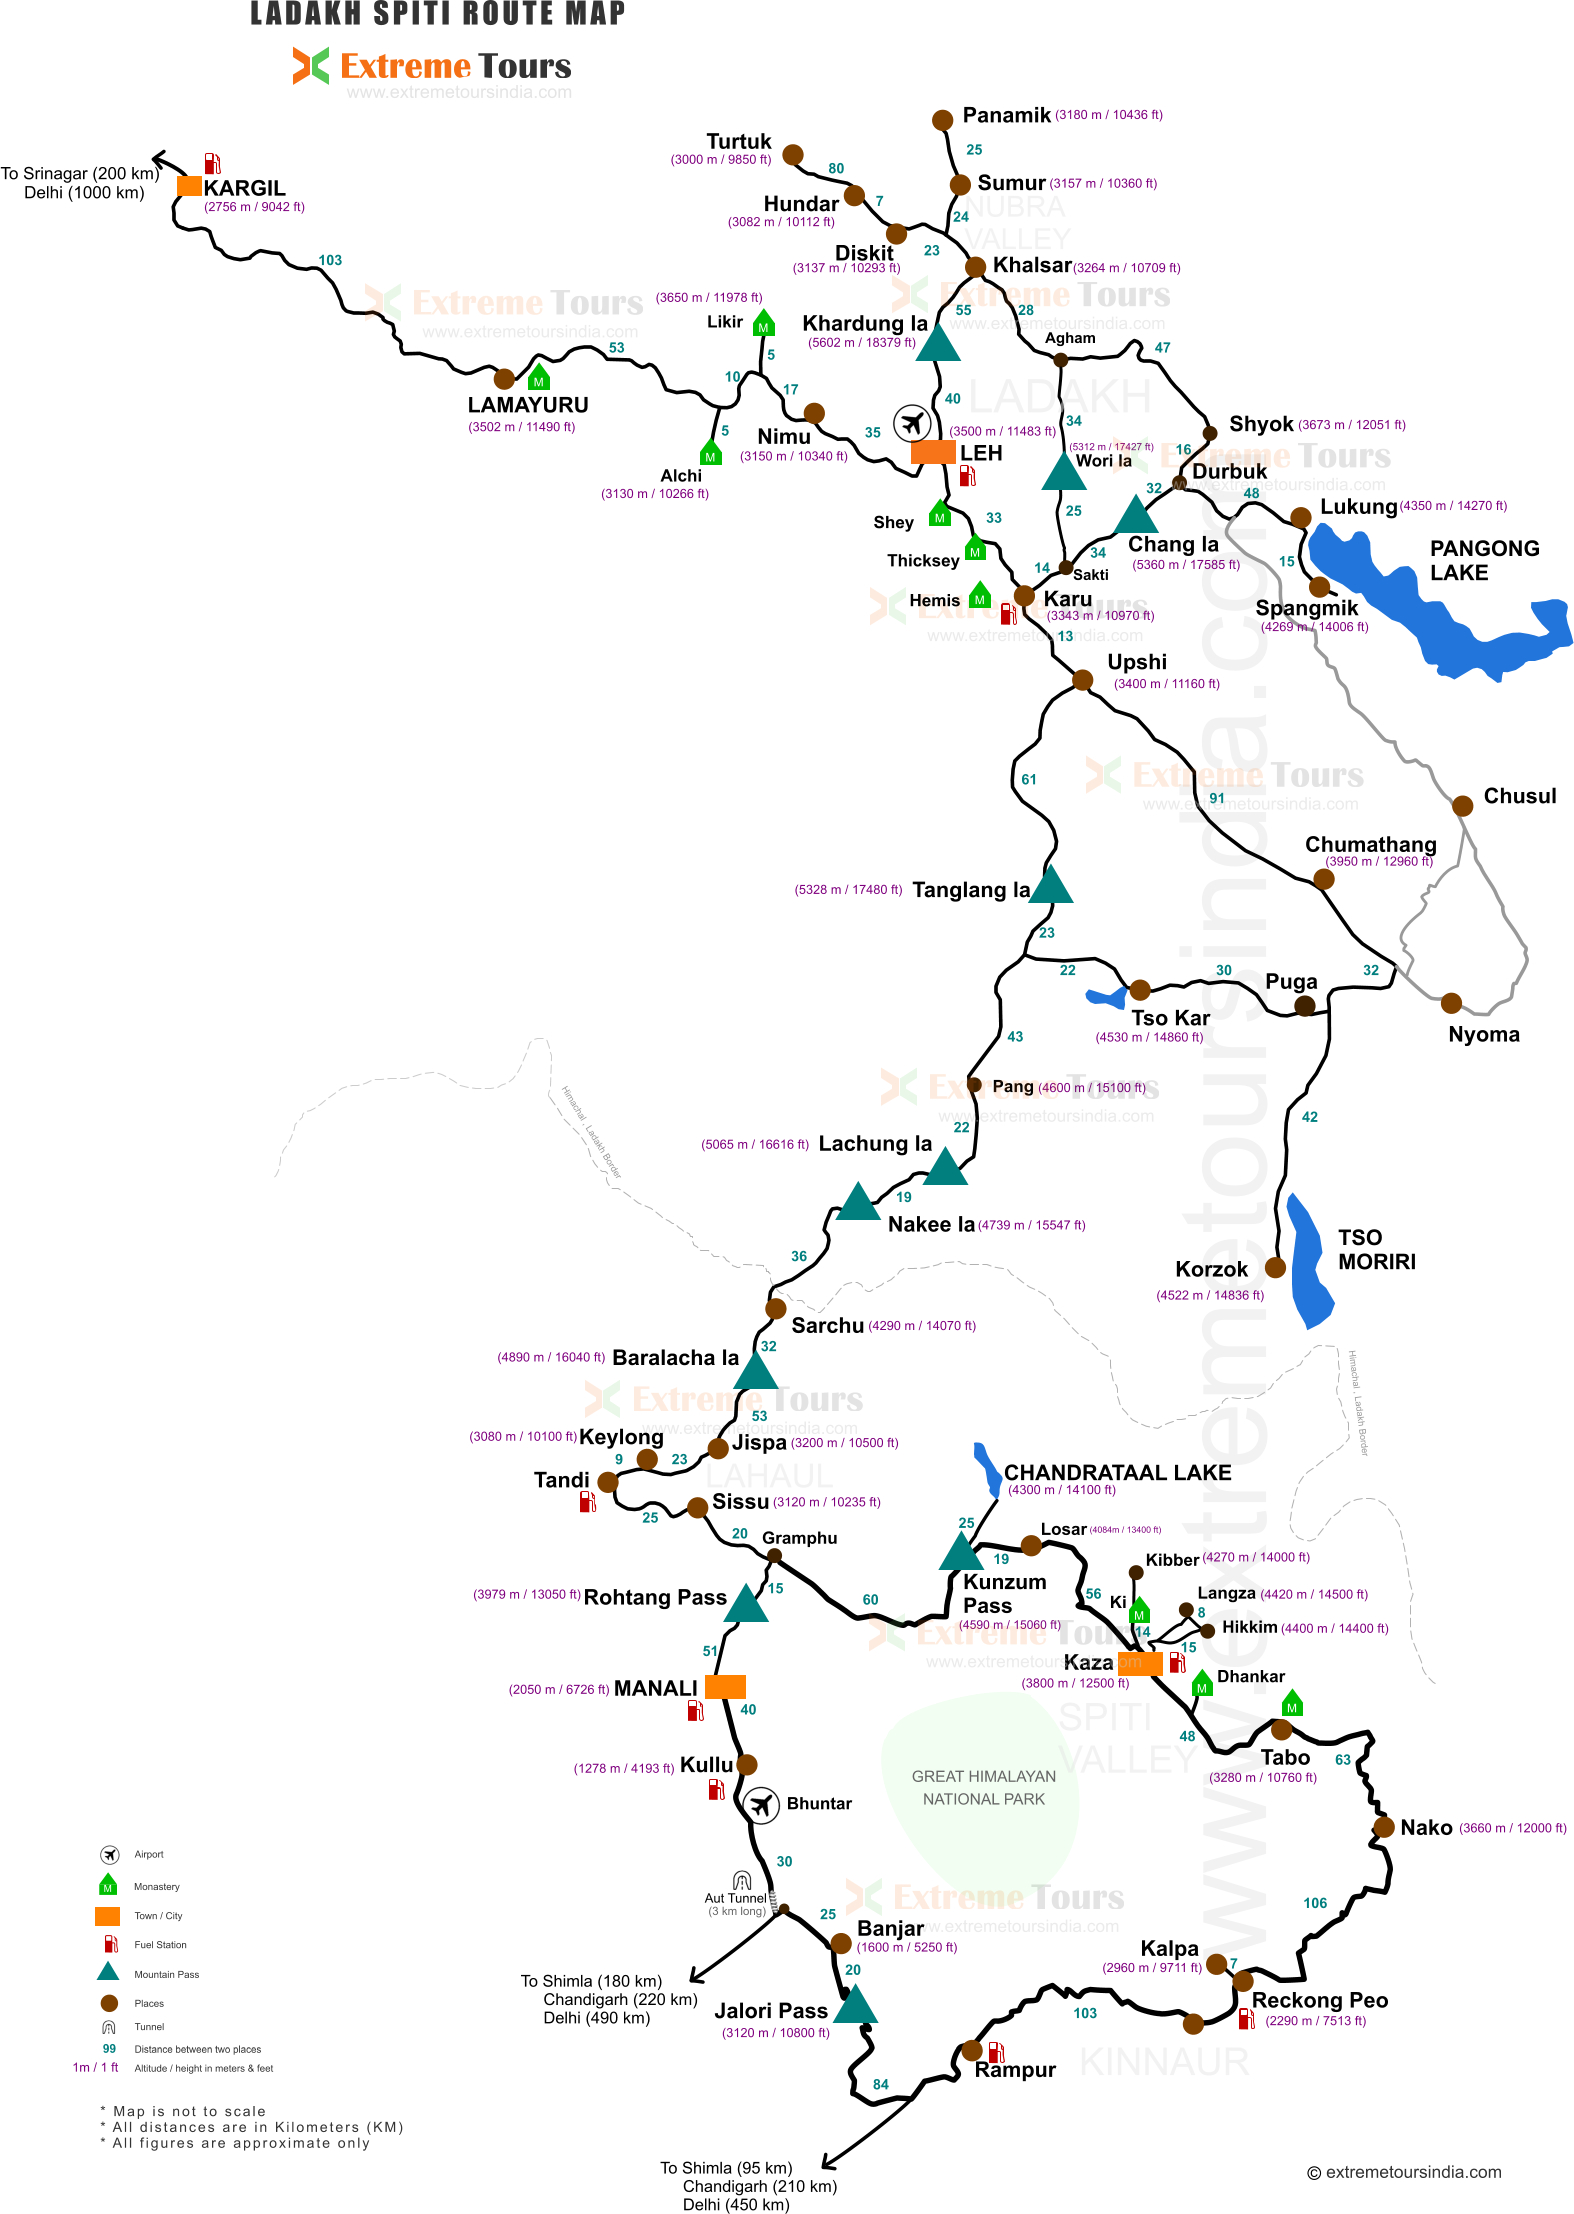 Ladakh Map, Spiti Map, Route Map for motorcycle road trip to Himalayas